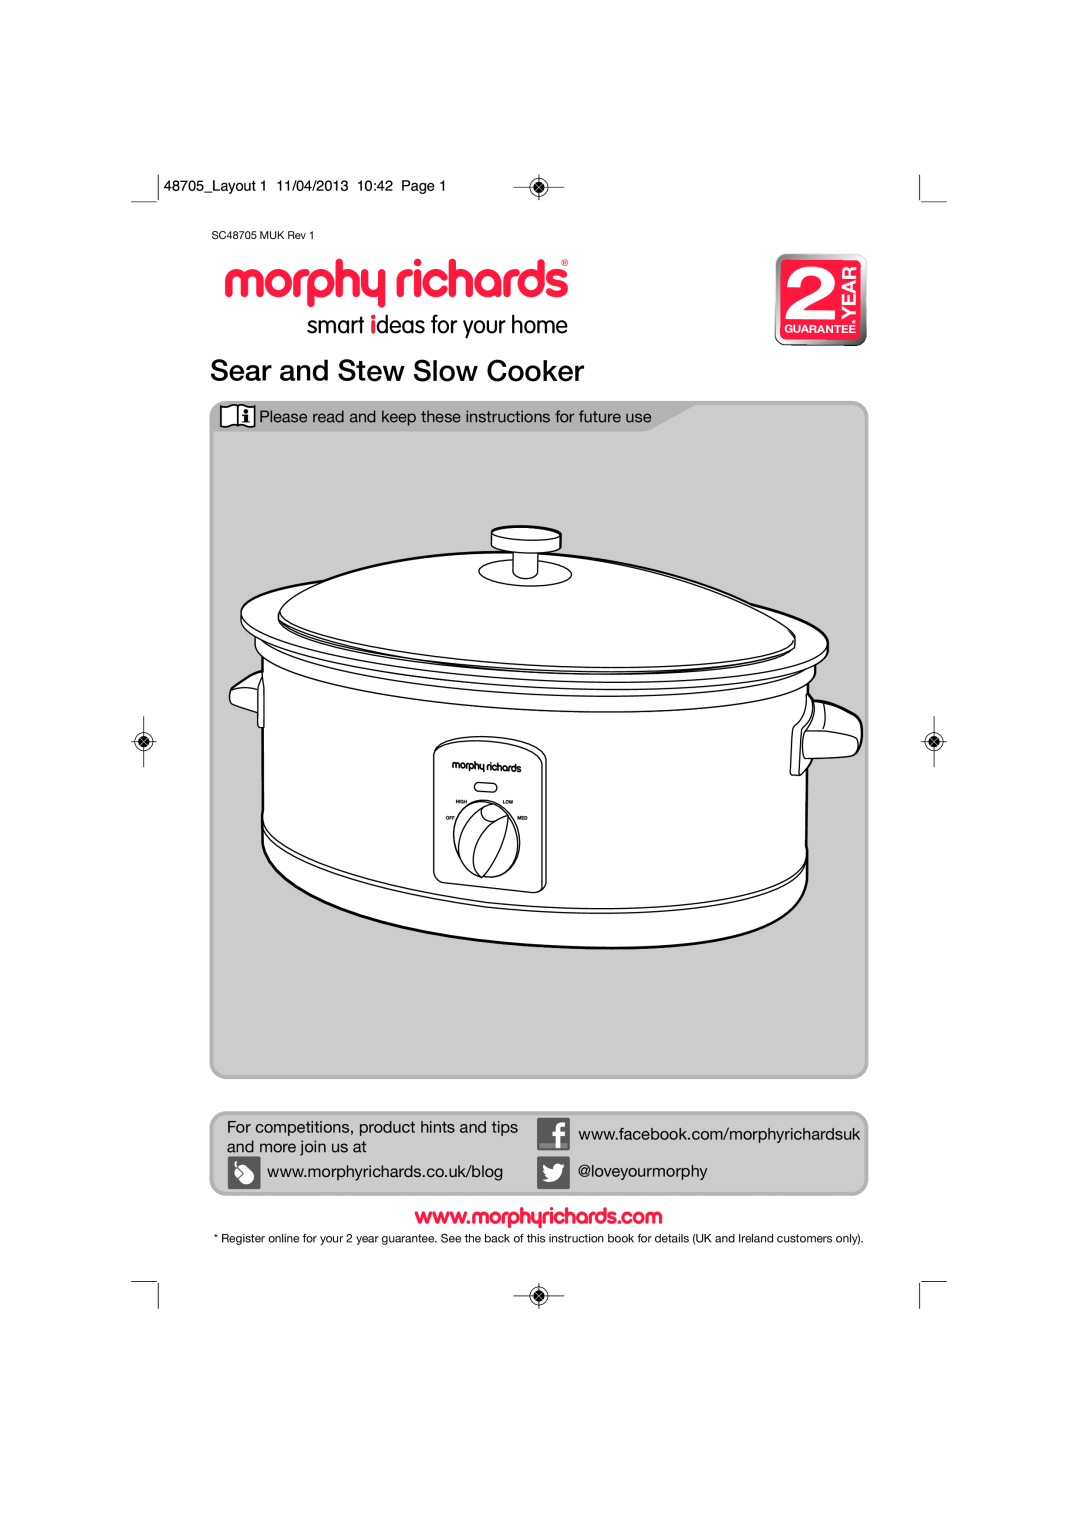 Morphy Richards SC48705 manual Sear and Stew Slow Cooker, Year, 48705Layout 1 11/04/2013 1042 Page, Guarantee 